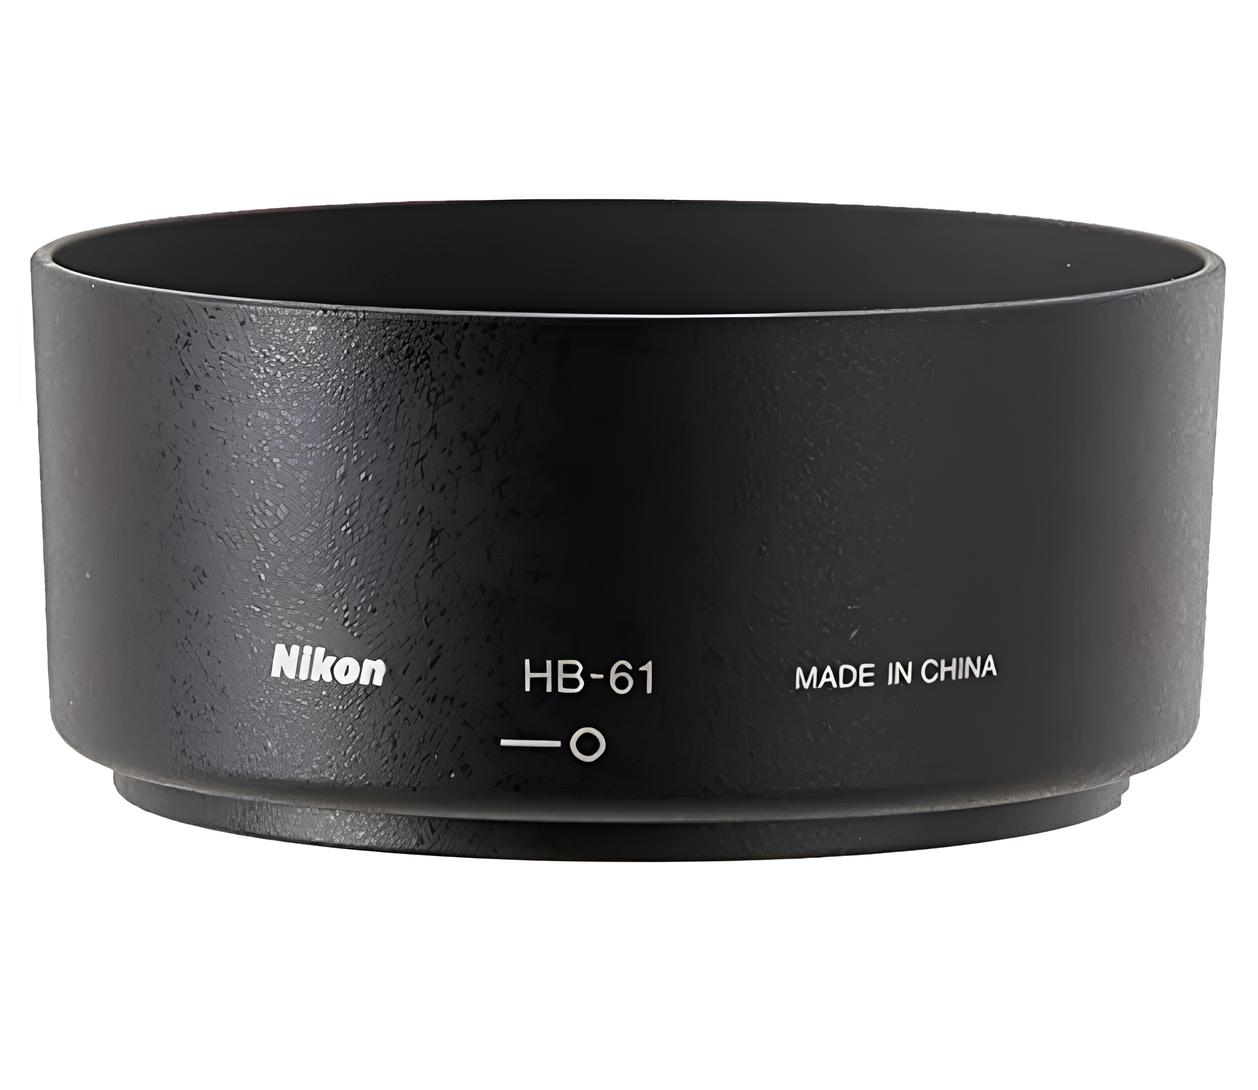 Nikon AF-S DX Micro-NIKKOR 40mm F/2.8G Fixed Zoom Lens with Auto Focus for Nikon DSLR Cameras - image 2 of 6